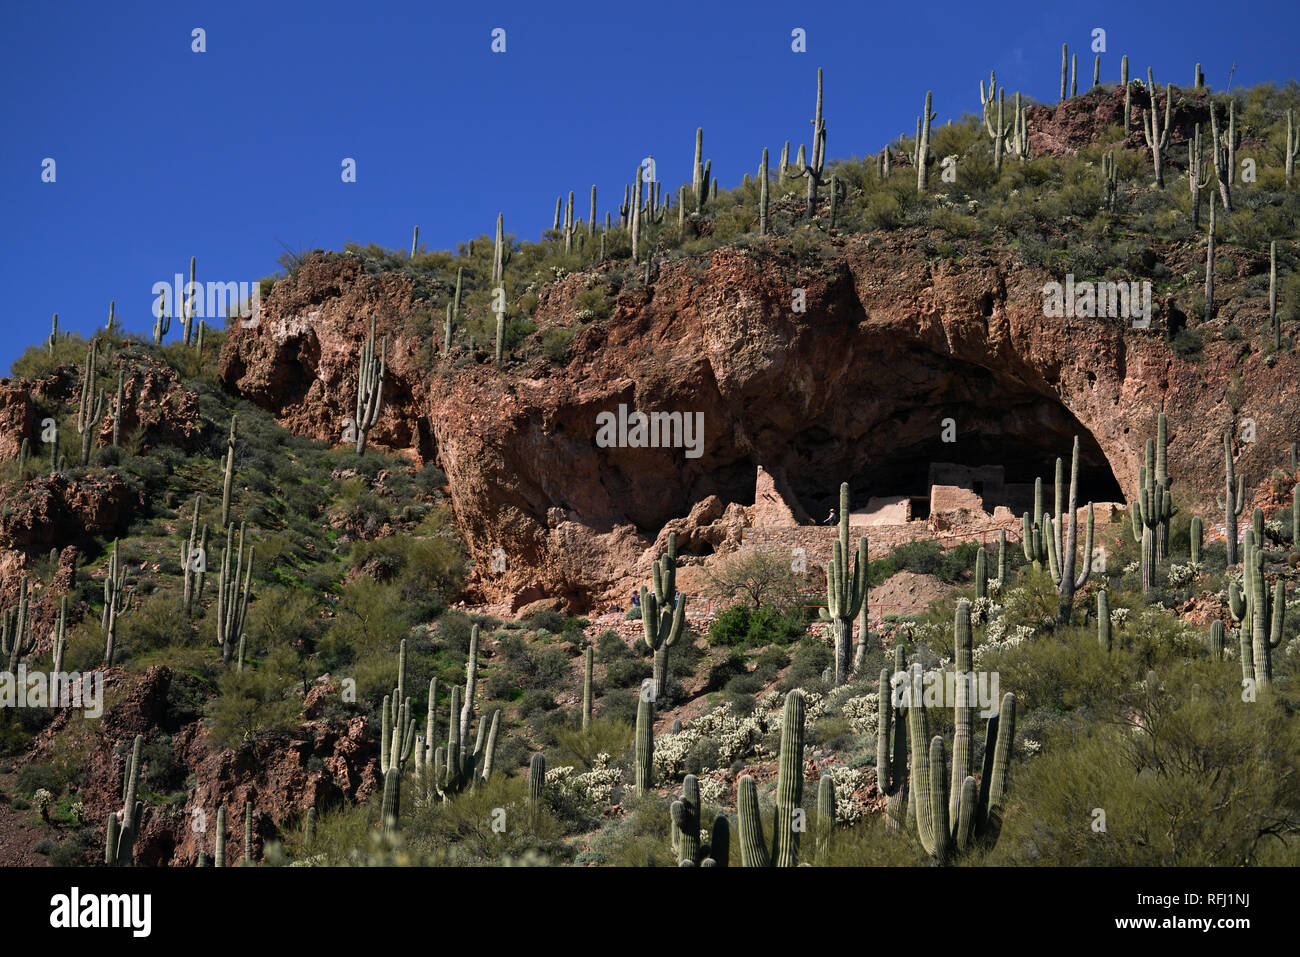 Tonto National Monument contains of the ruins of two cliff dwellings established by the Salado Indians around 1300 AD. Stock Photo